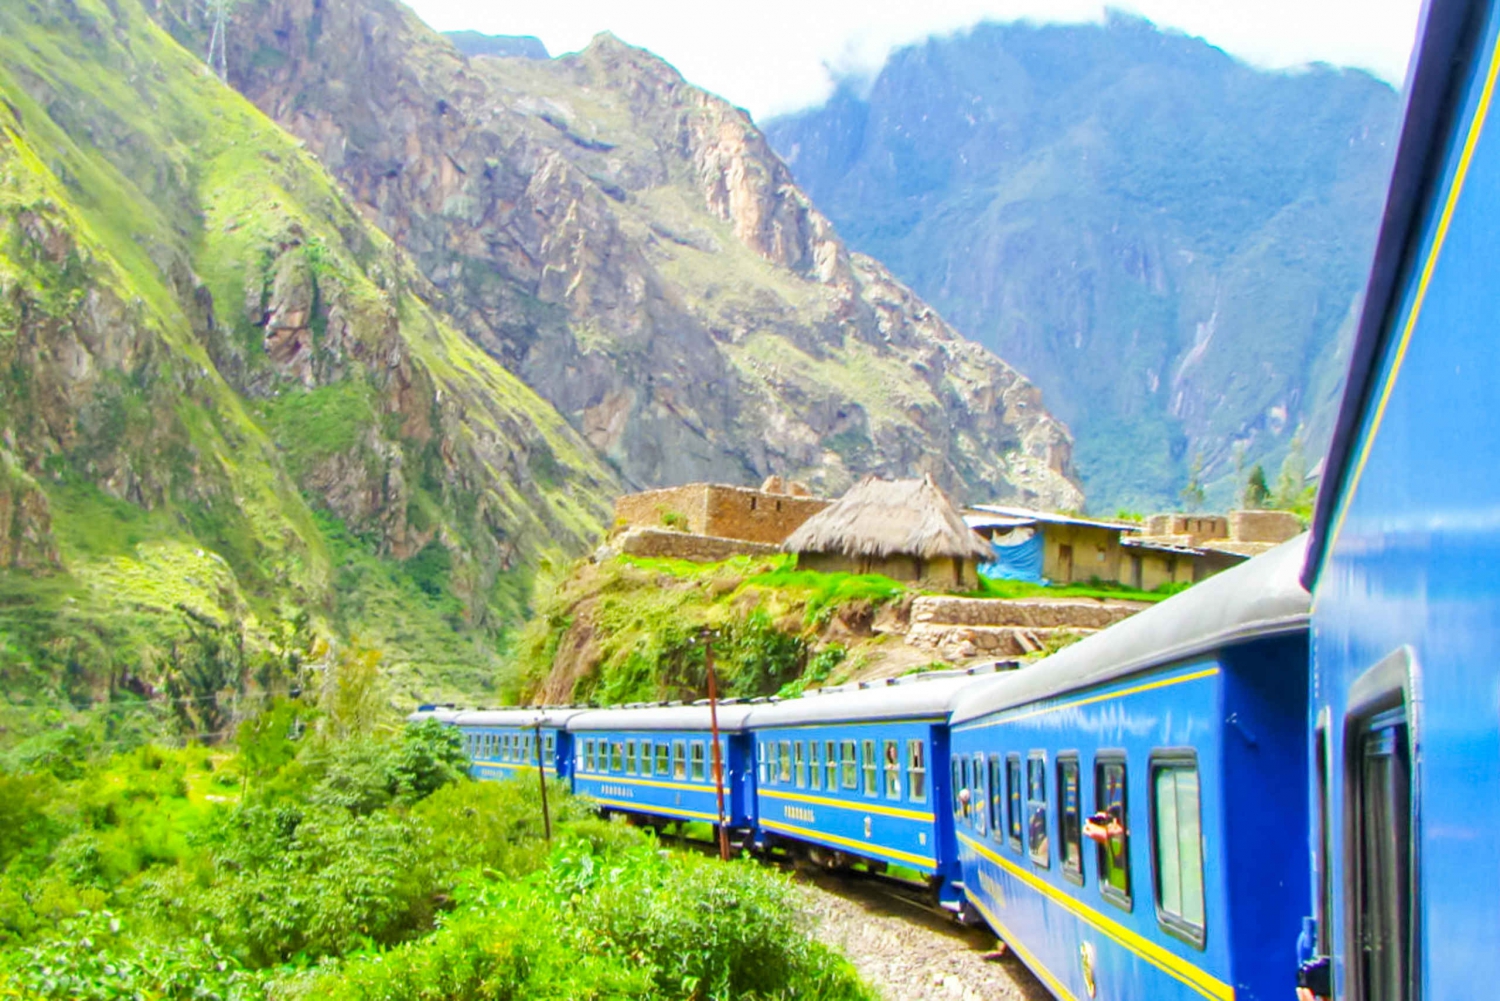 Best two days tours from Cusco, Peru